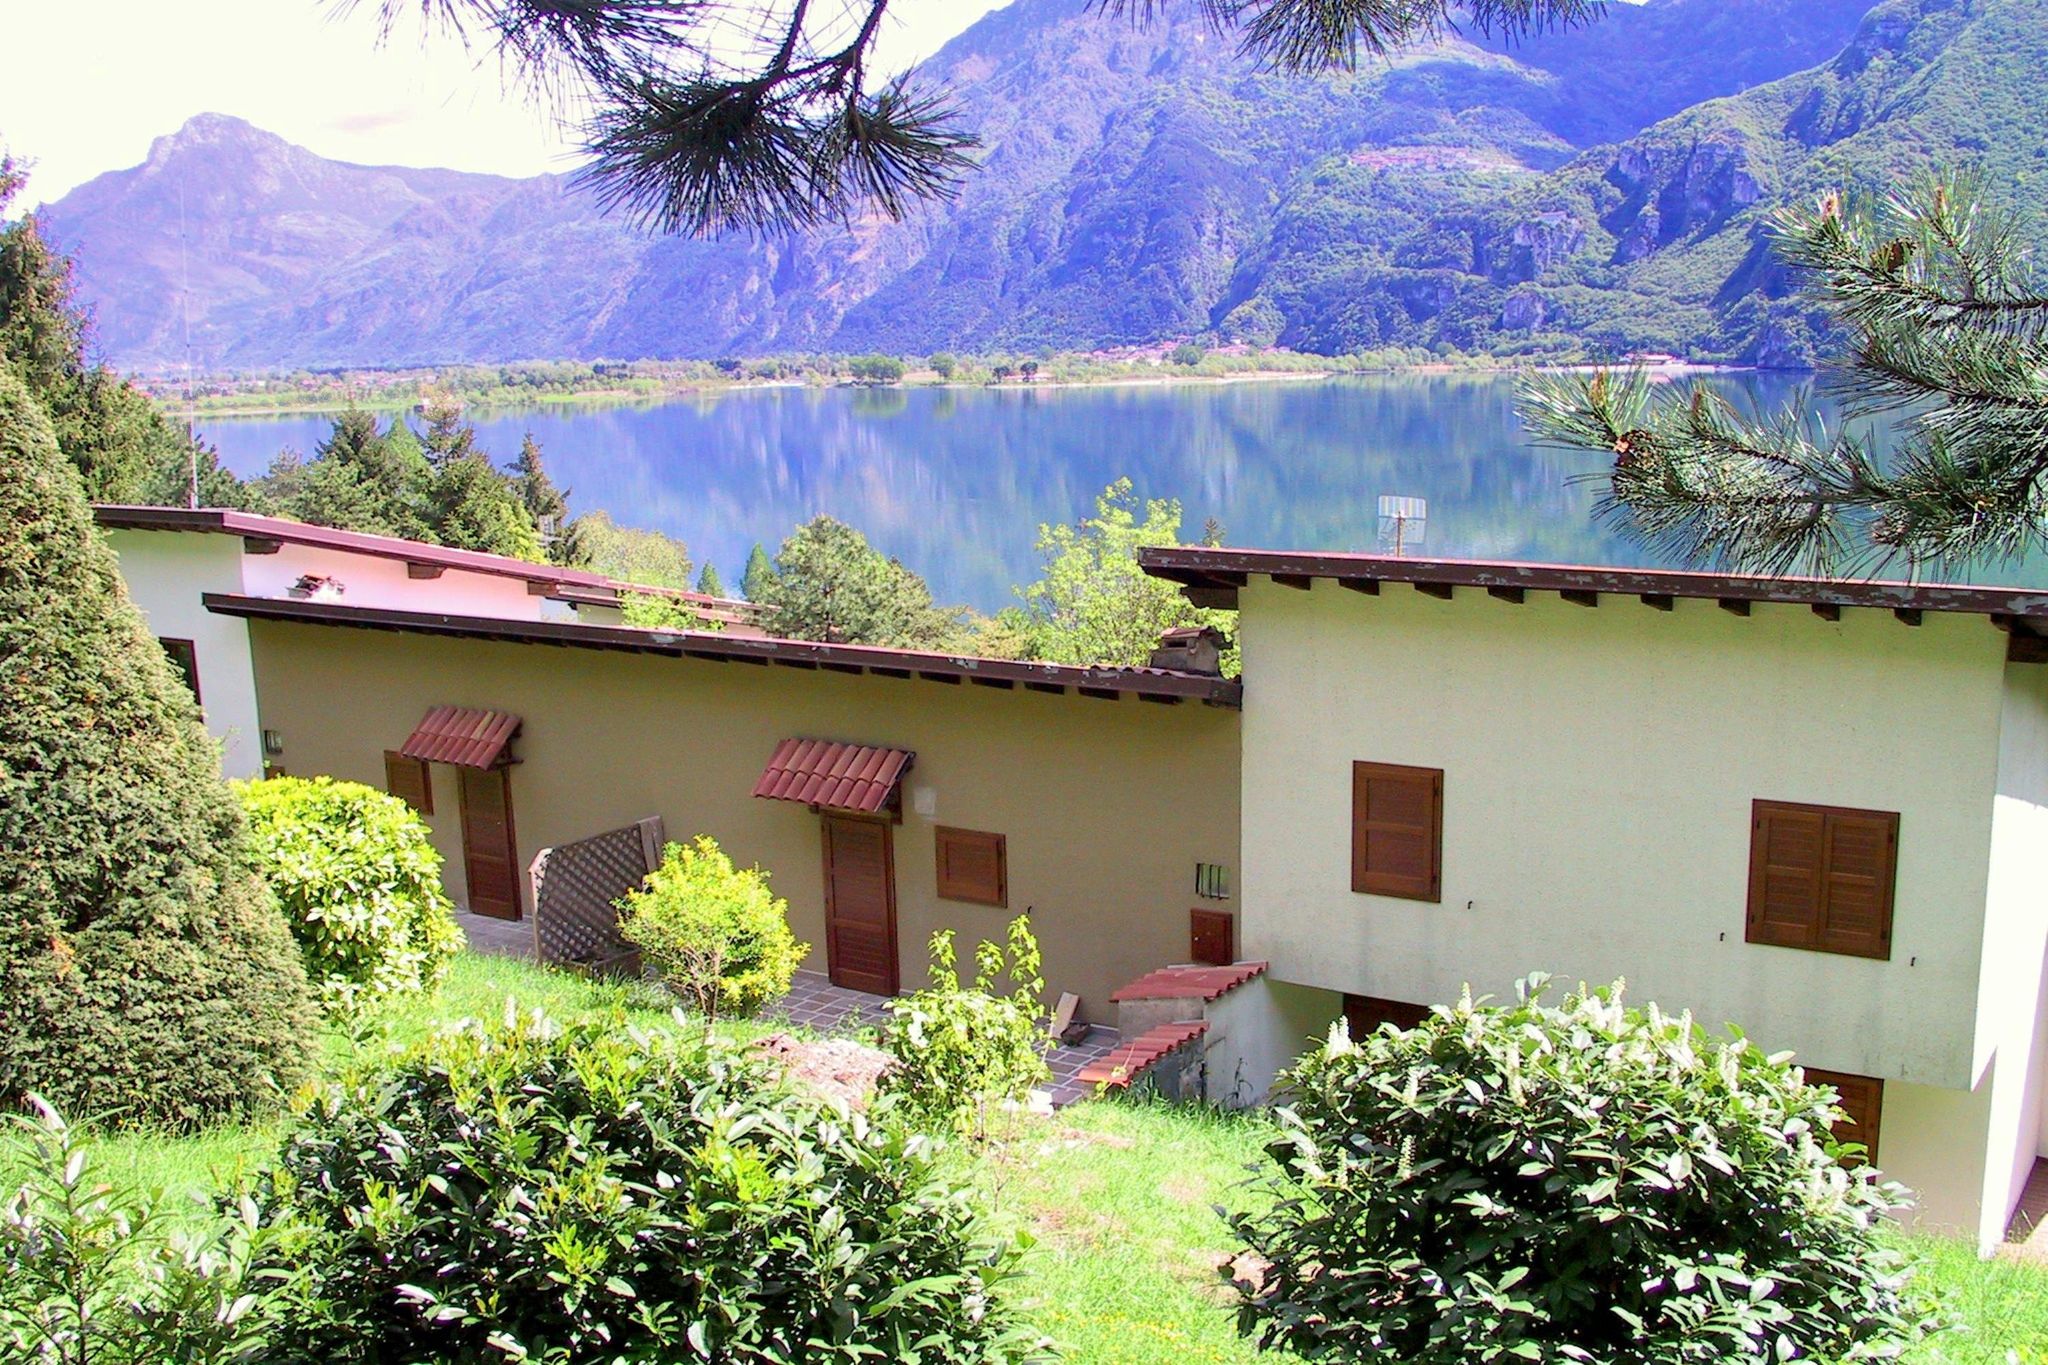 On the banks of the Idro lake in a quiet location.